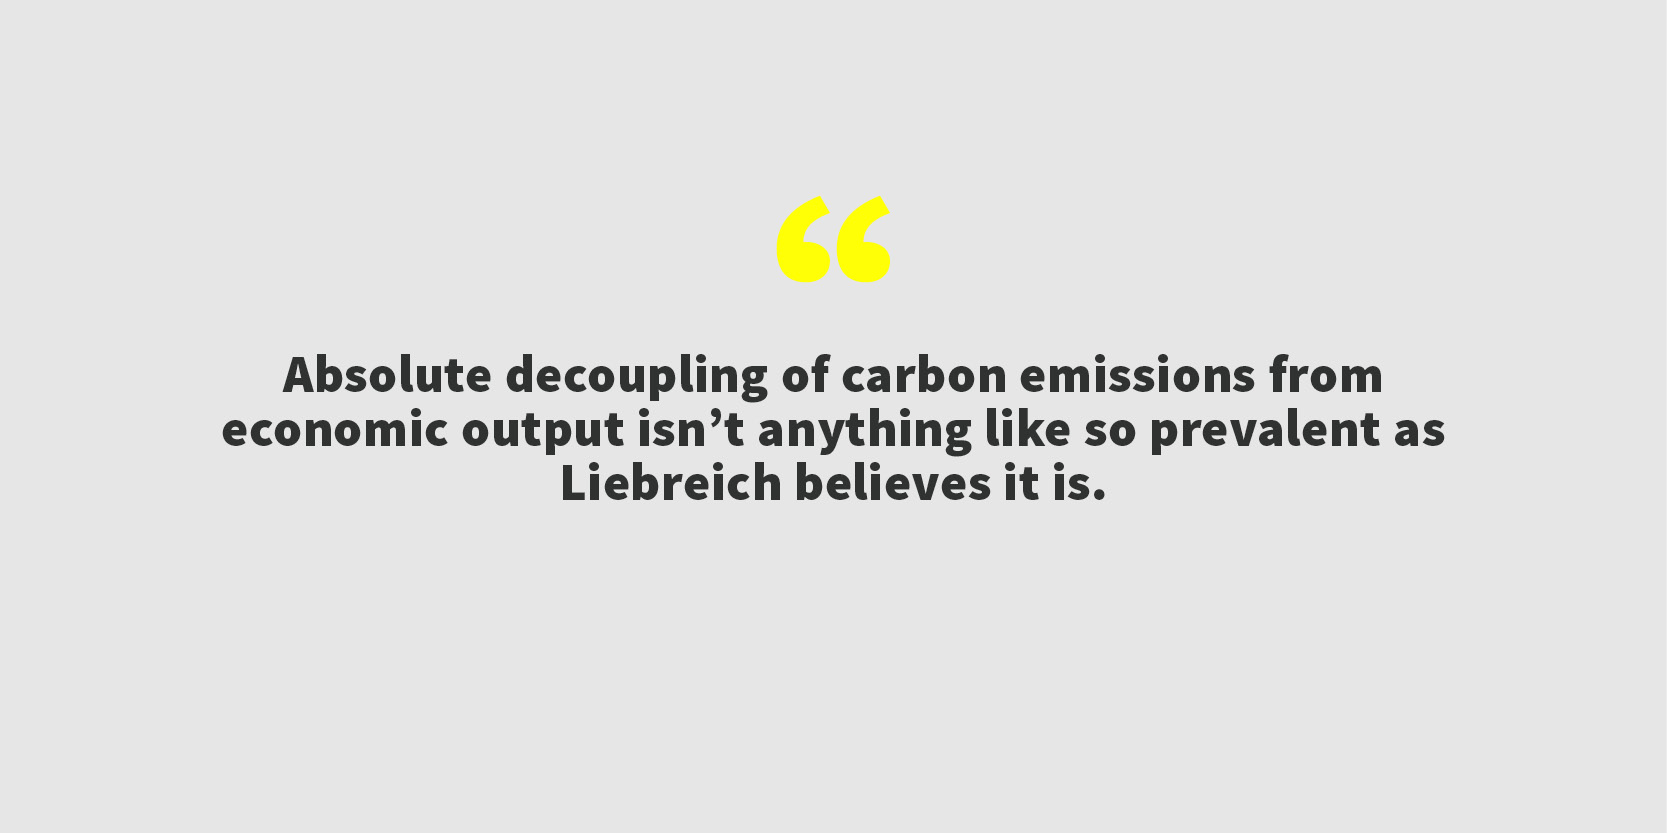 Absolute decoupling of carbon emissions from economic output, for example, isn’t anything like so prevalent as Liebreich believes it is.